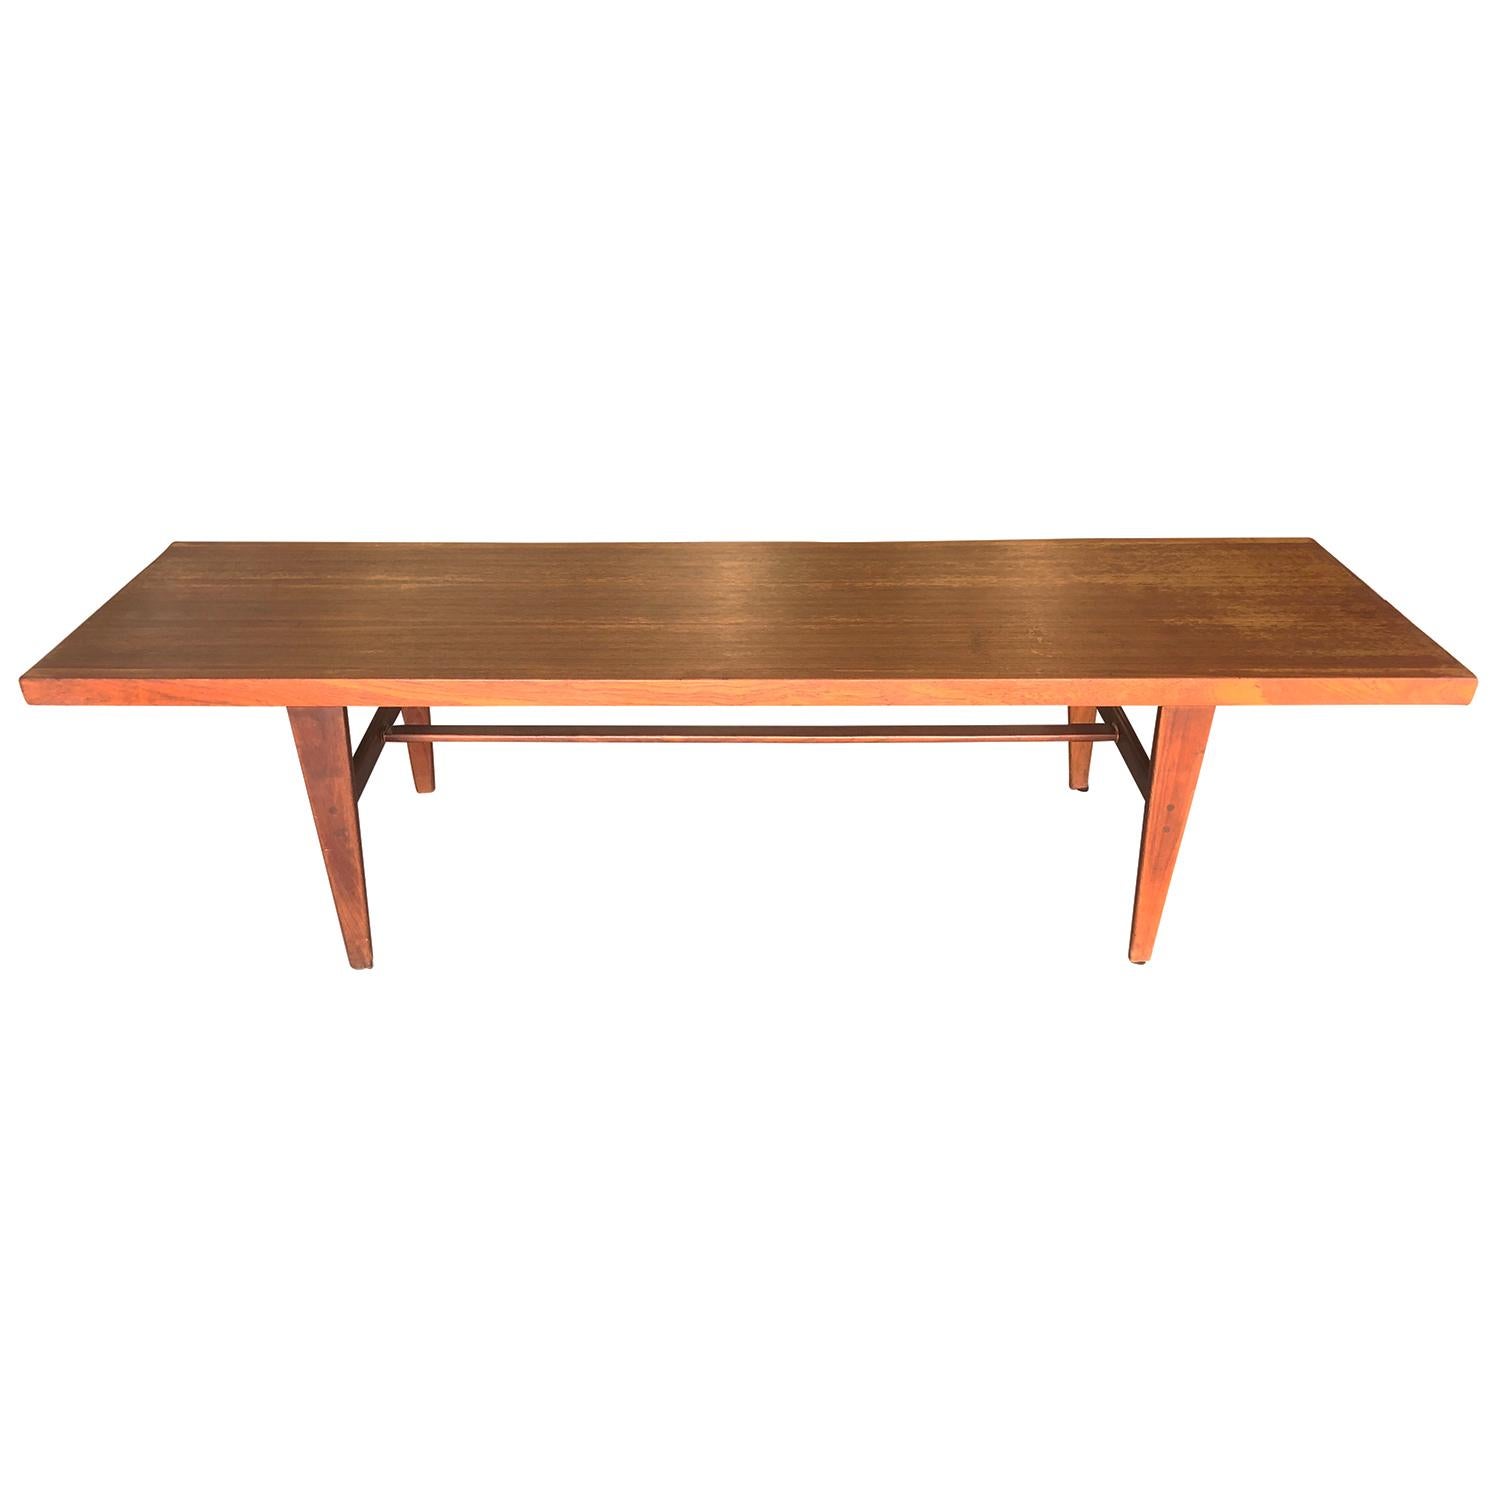 A vintage Mid-Century Modern Danish side, sofa table made of hand crafted Teakwood with extension, in good condition. The large Scandinavian coffee table is supported by four straight wooden feet. Wear consistent with age and use. Circa 1940 - 1960,